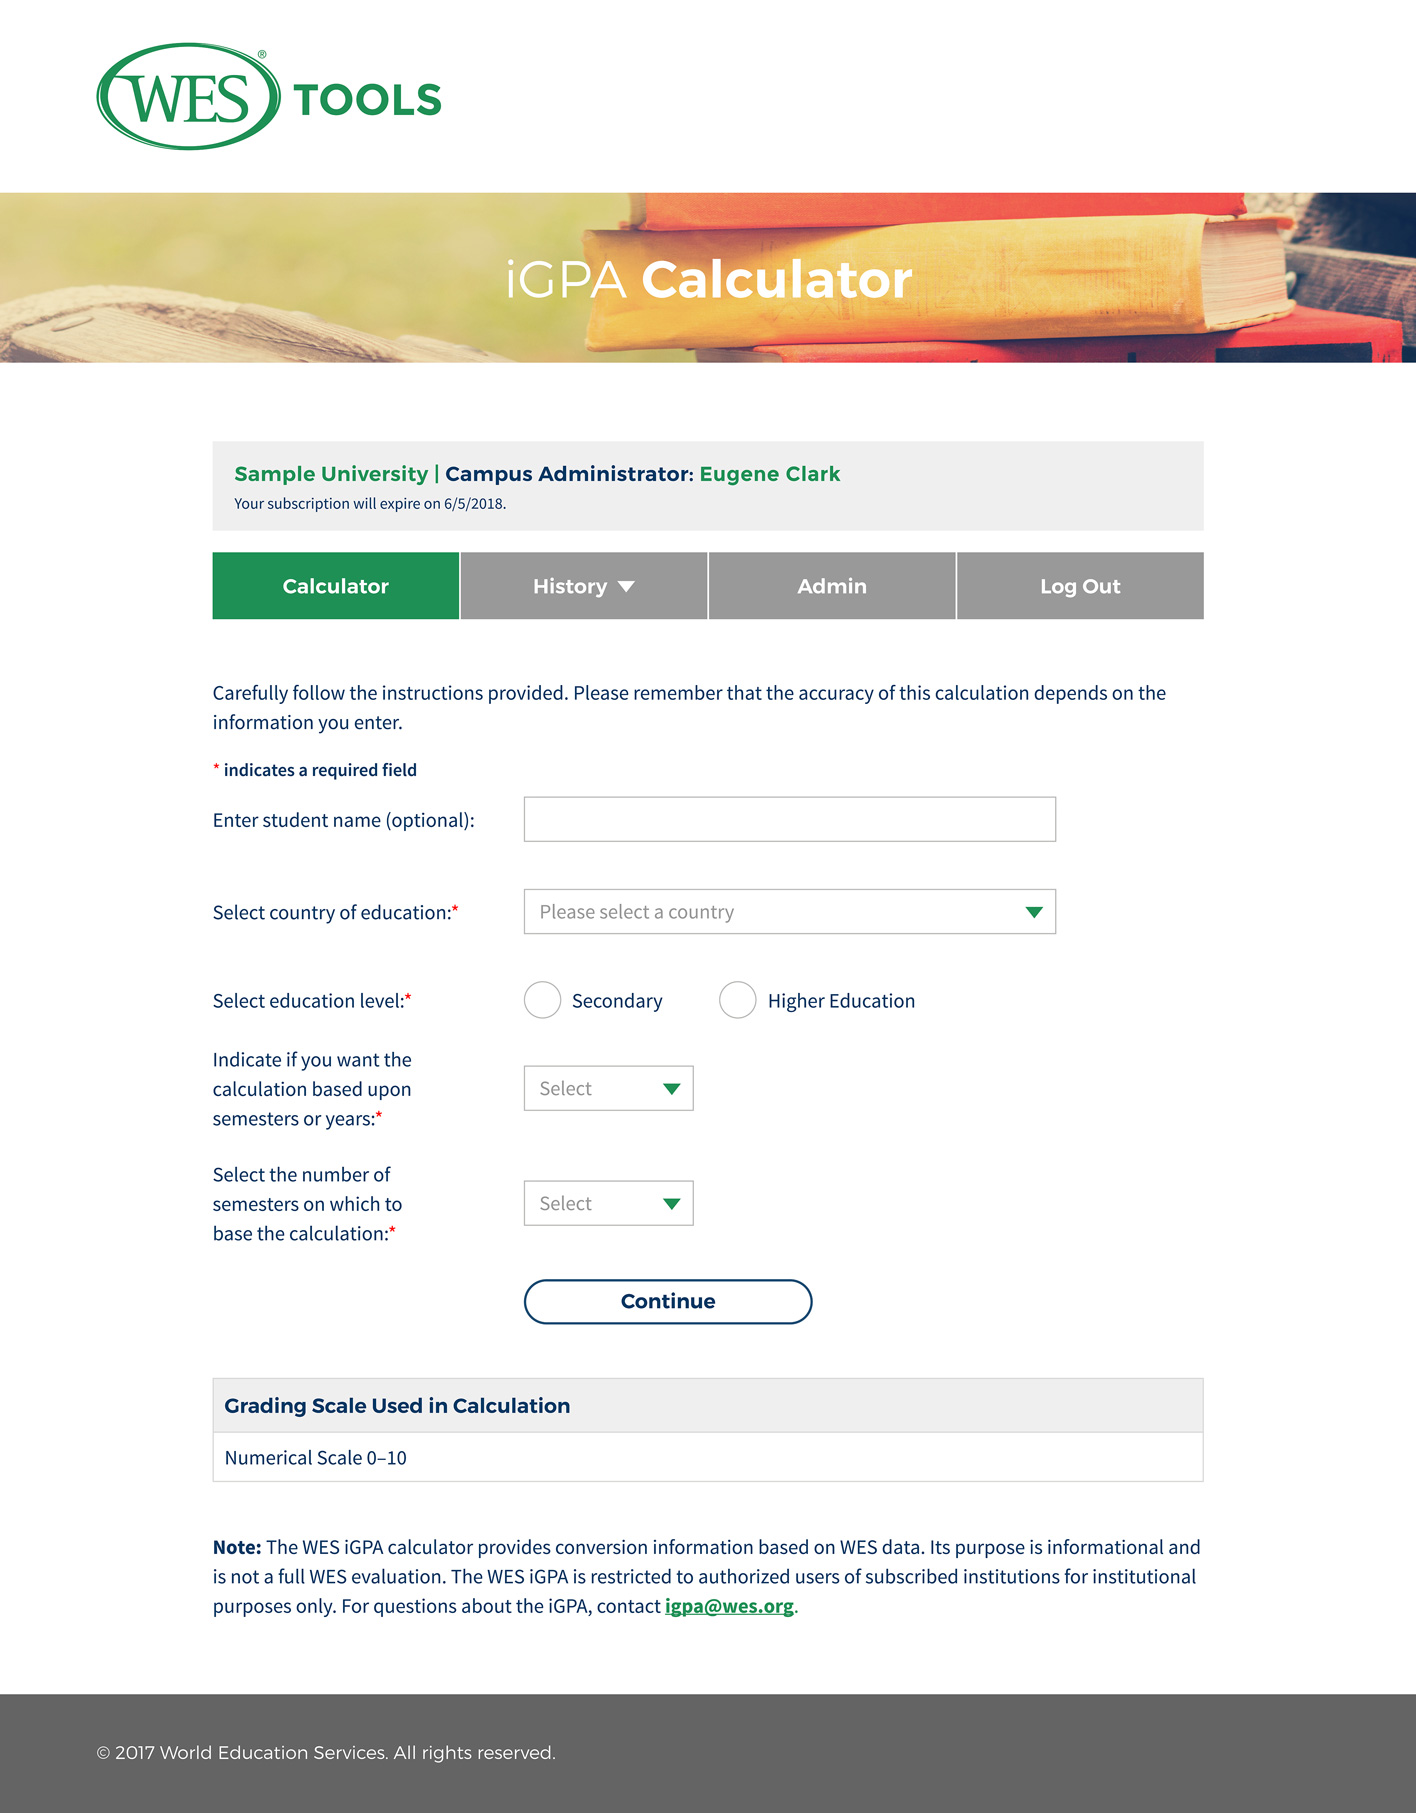 Design for the data-entry page of World Education Services' iGPA calendar. Includes nav for calculator, history, admin, and logout; also includes text fields and radio buttons to enter student information.